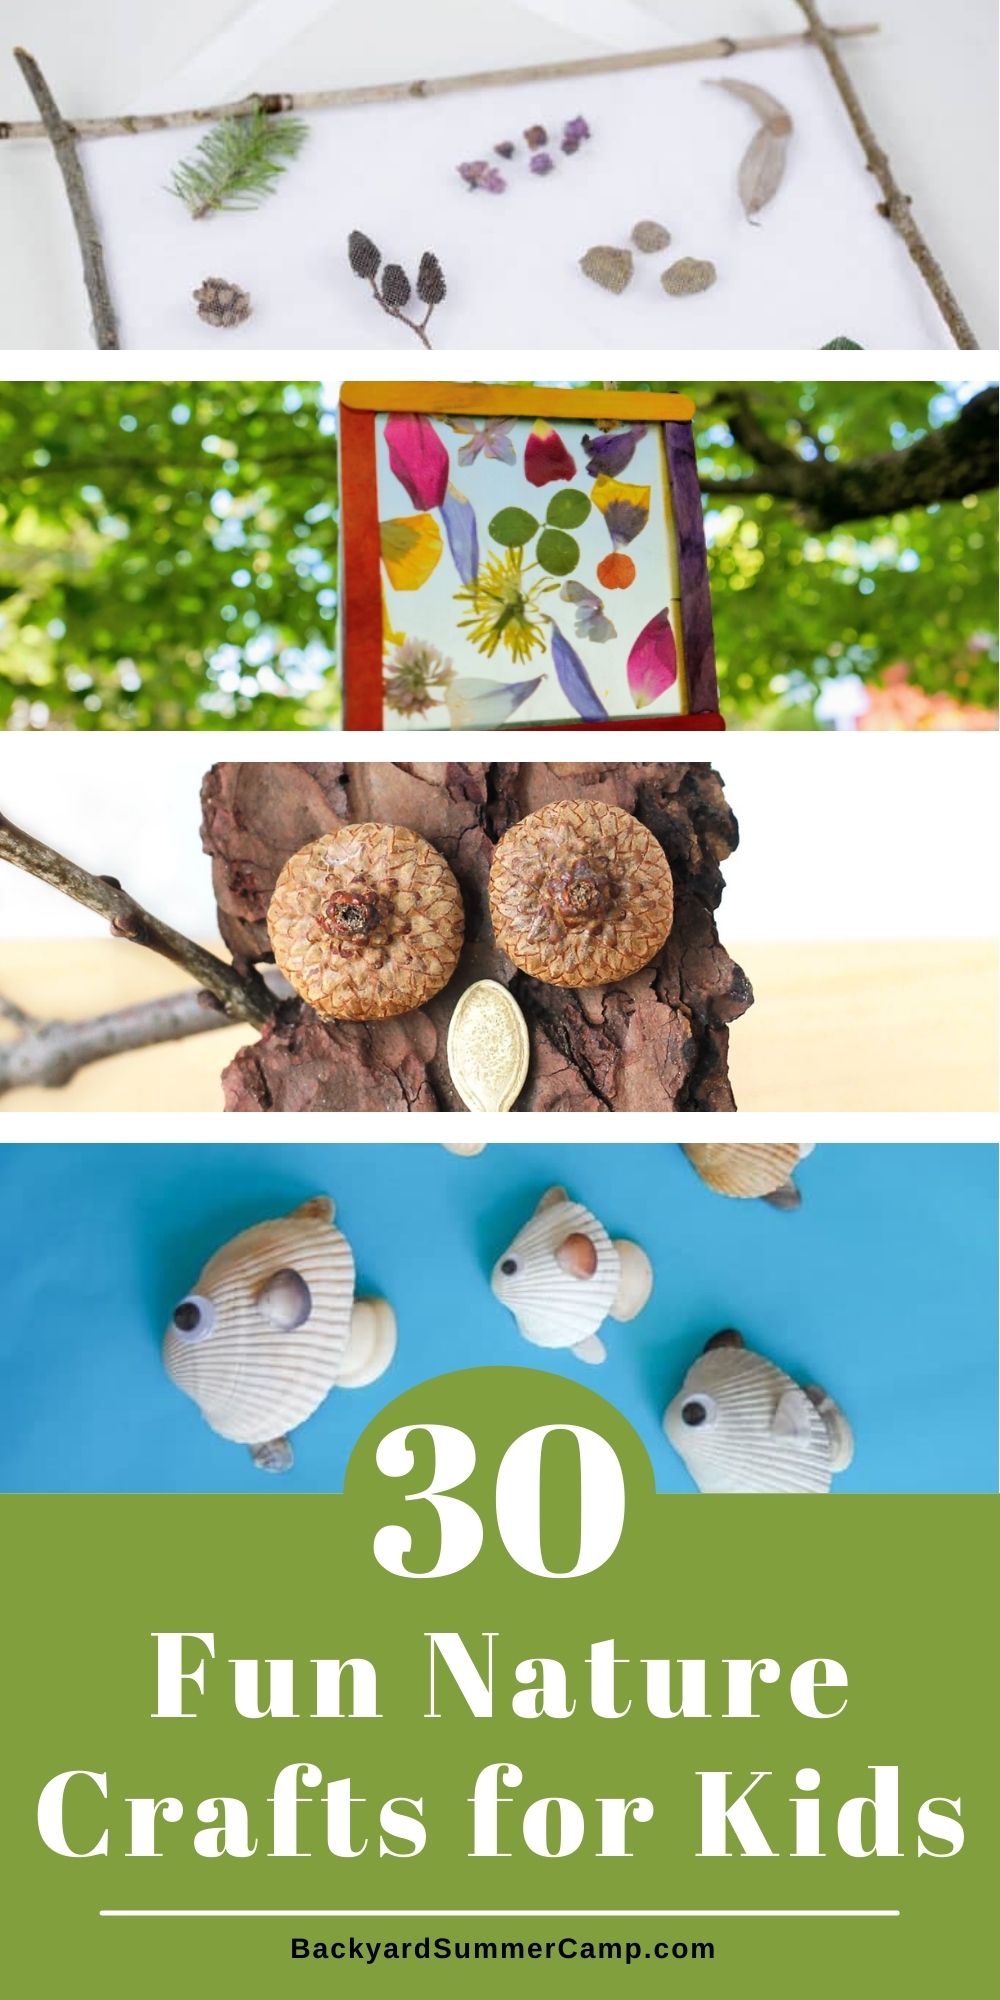 Crafts and Activities for Kids  Nature crafts, Crafts for kids, Craft  projects for kids